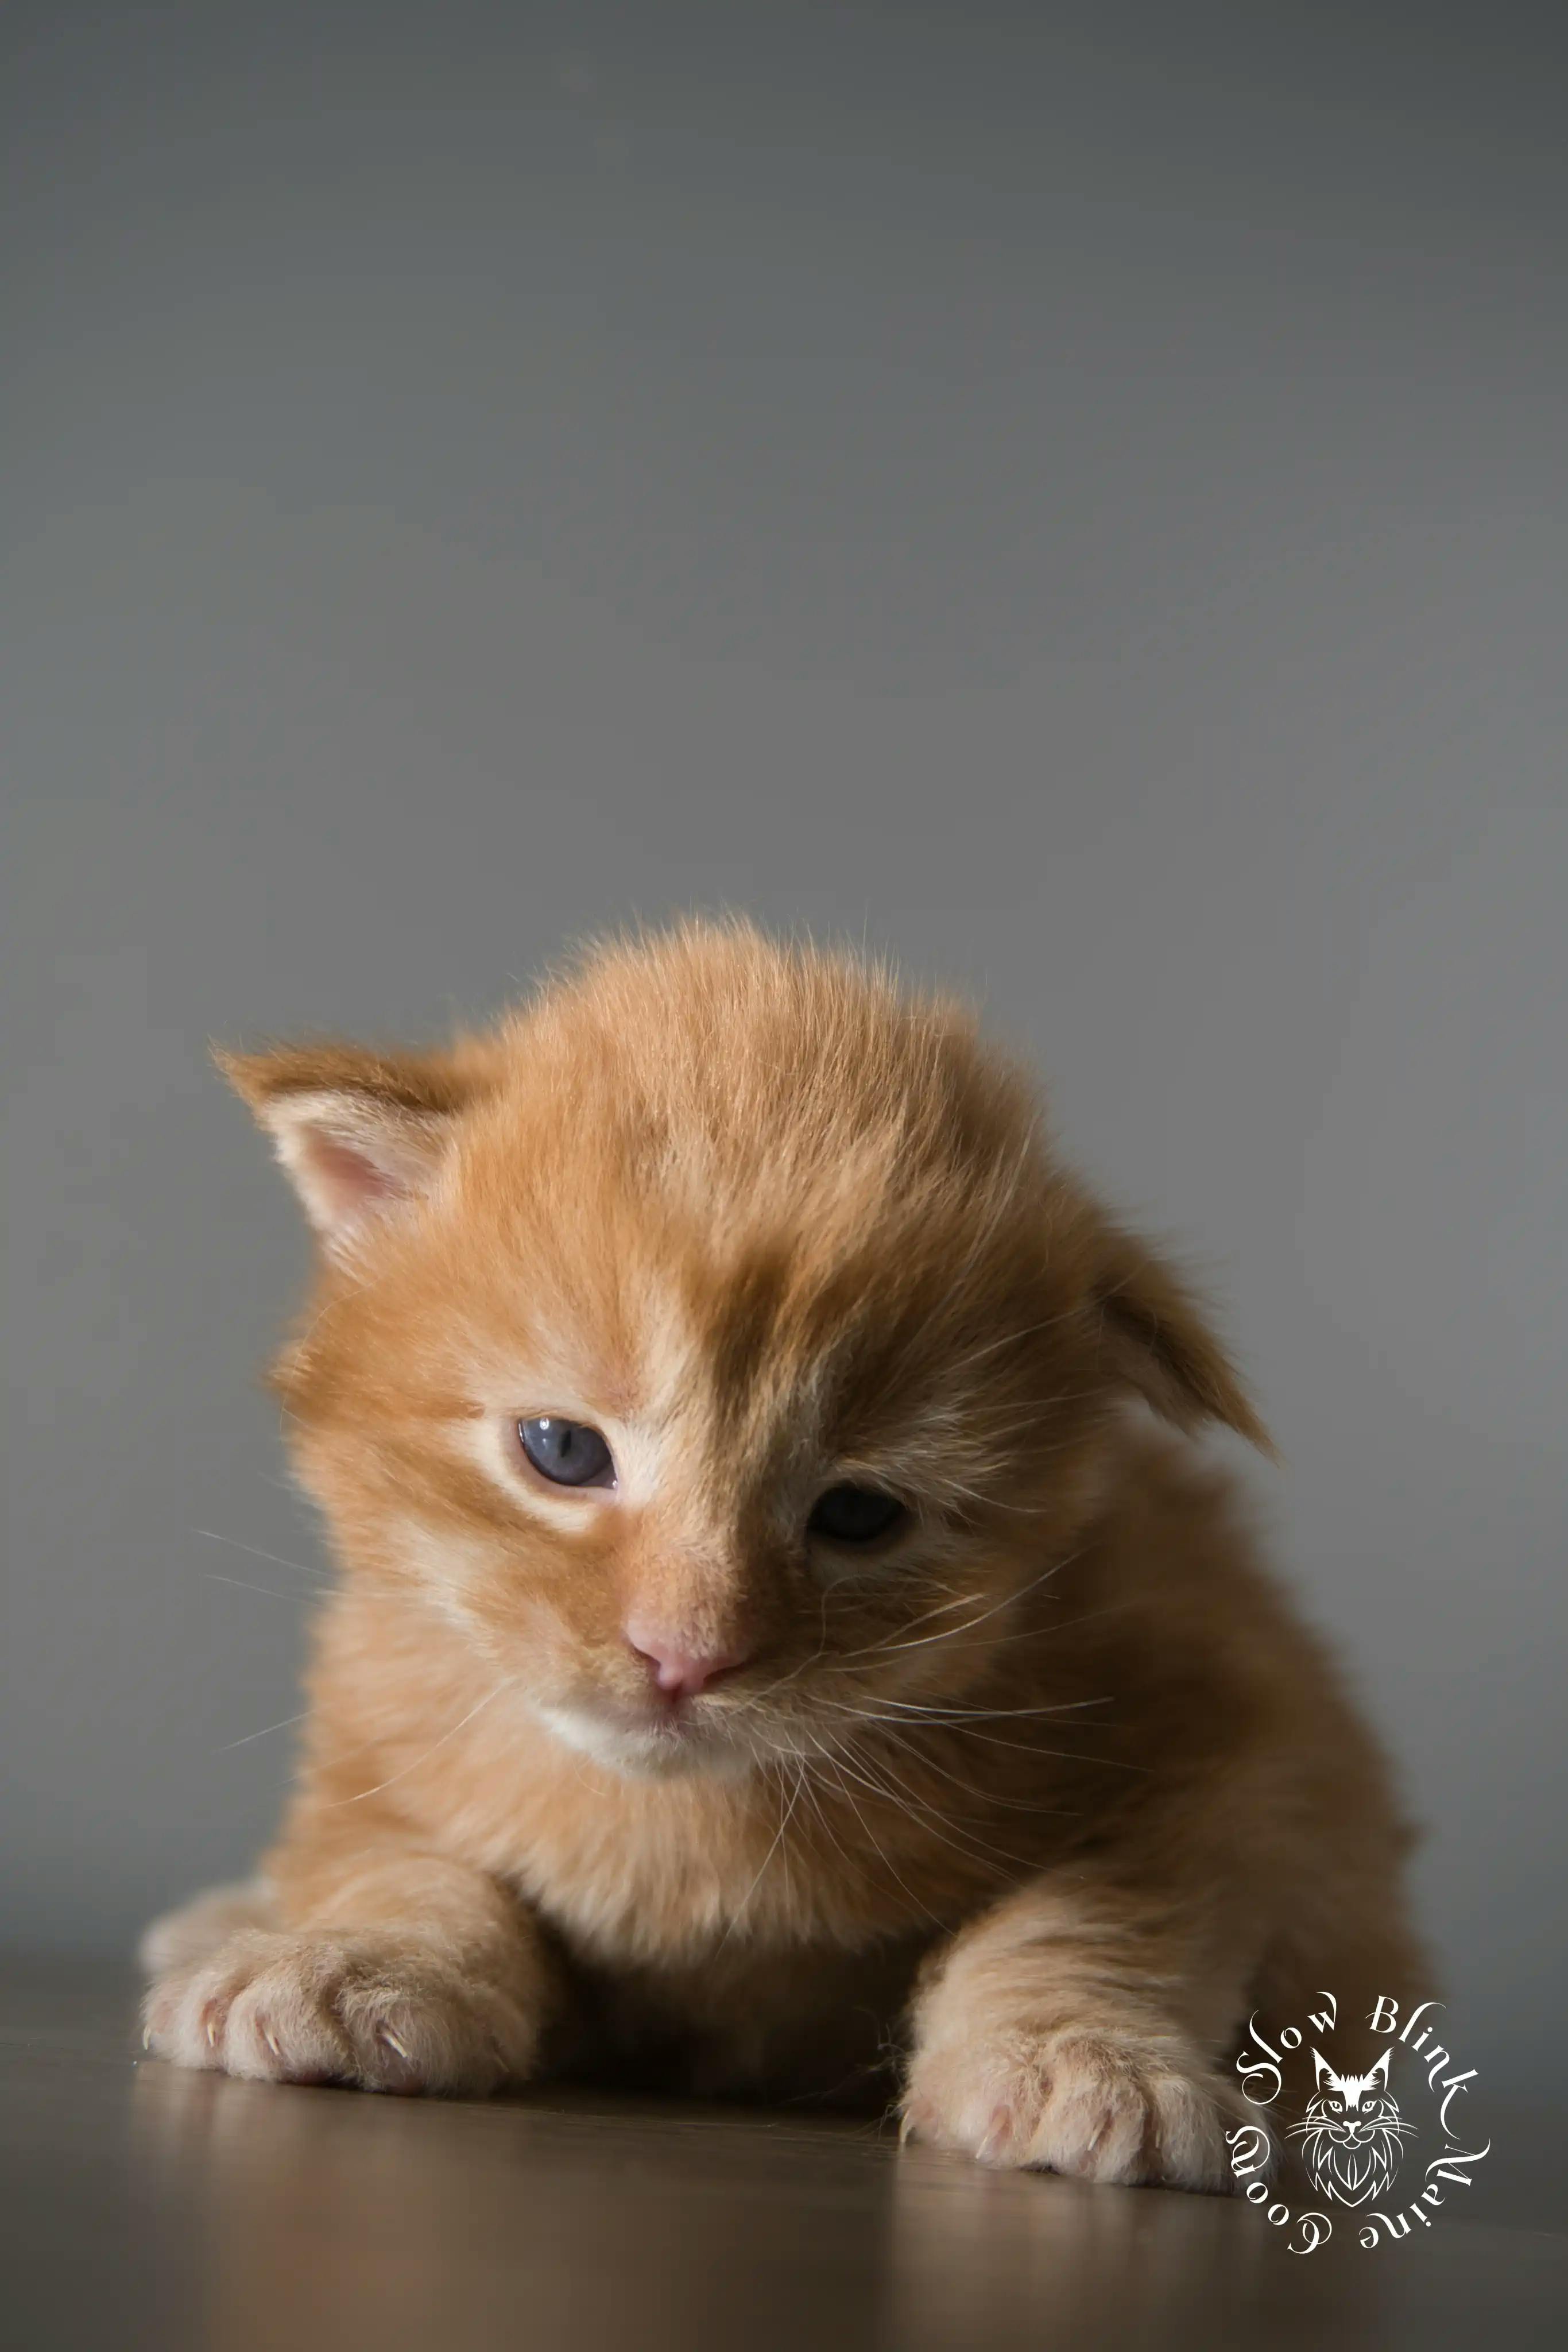 Orange (Red) Maine Coon Kittens > red orange maine coon kitten | slowblinkmainecoons | ems code d ds ds 22 2